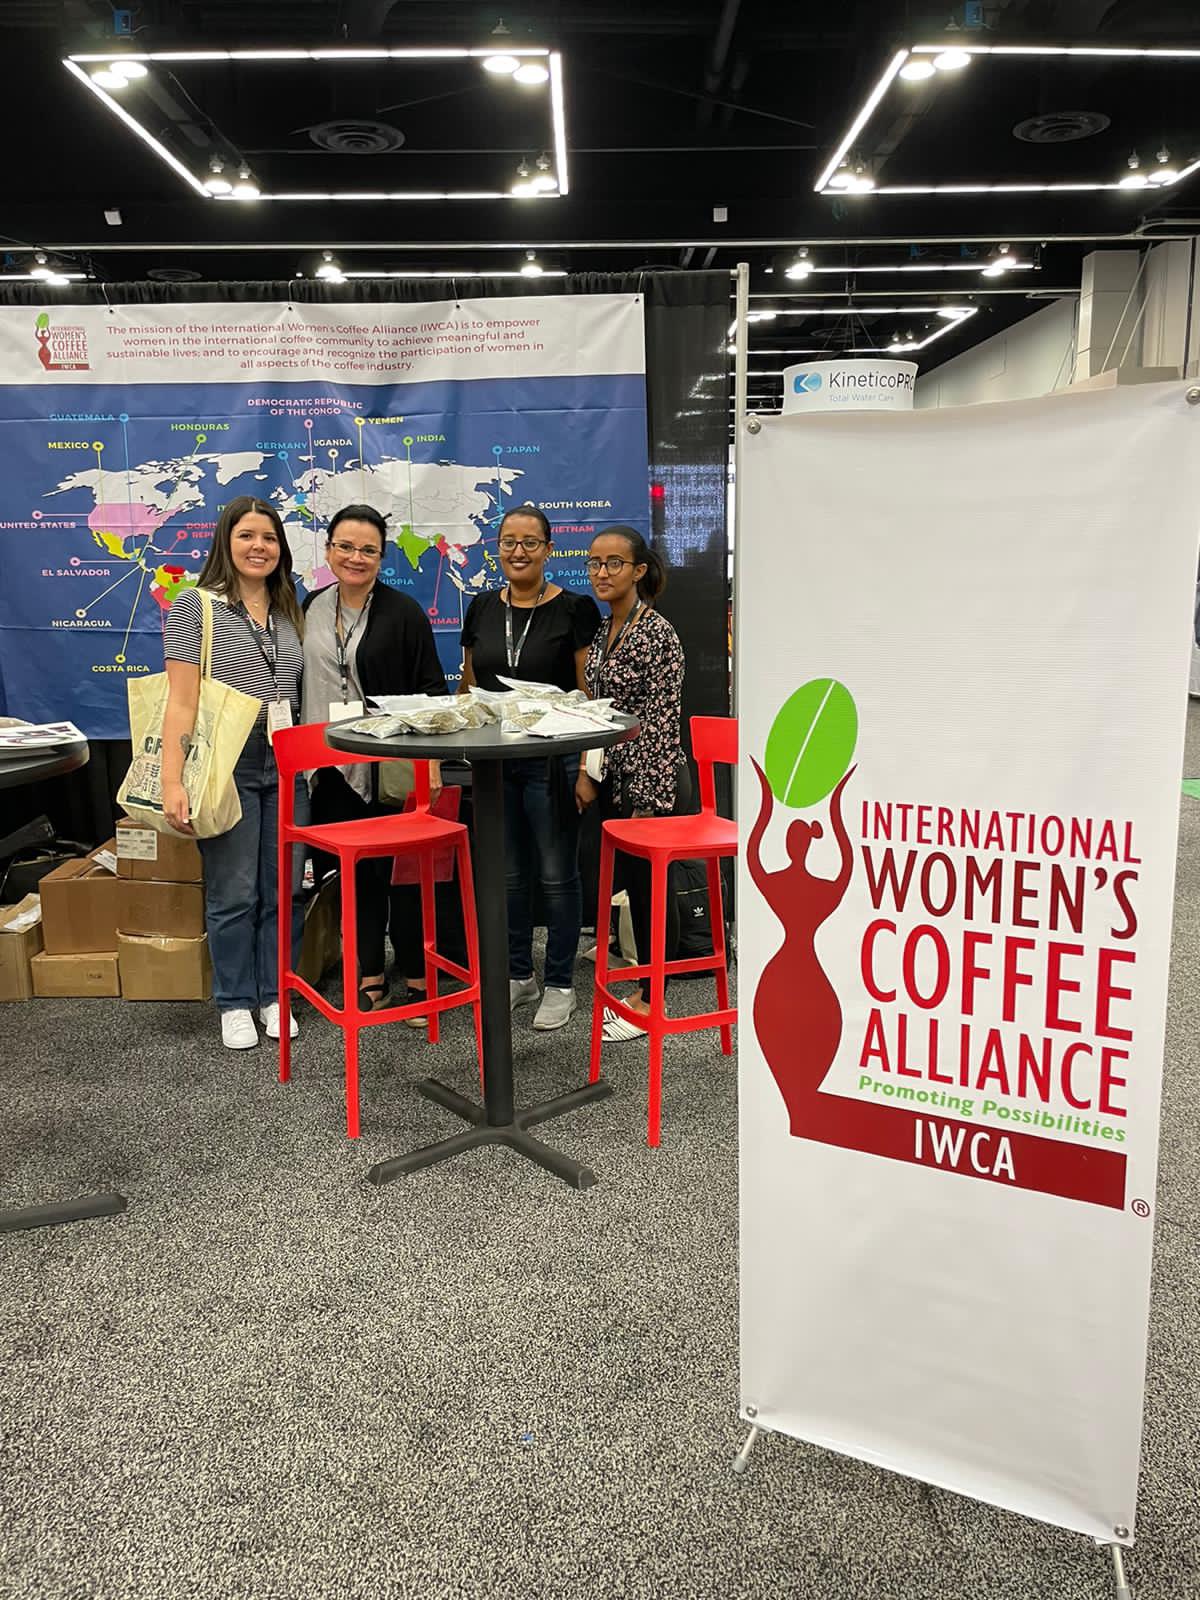 IWCA VIETNAM PARTICIPATES IN THE SCA EXPO – THE LARGEST COFFEE EXHIBITION IN NORTH AMERICA